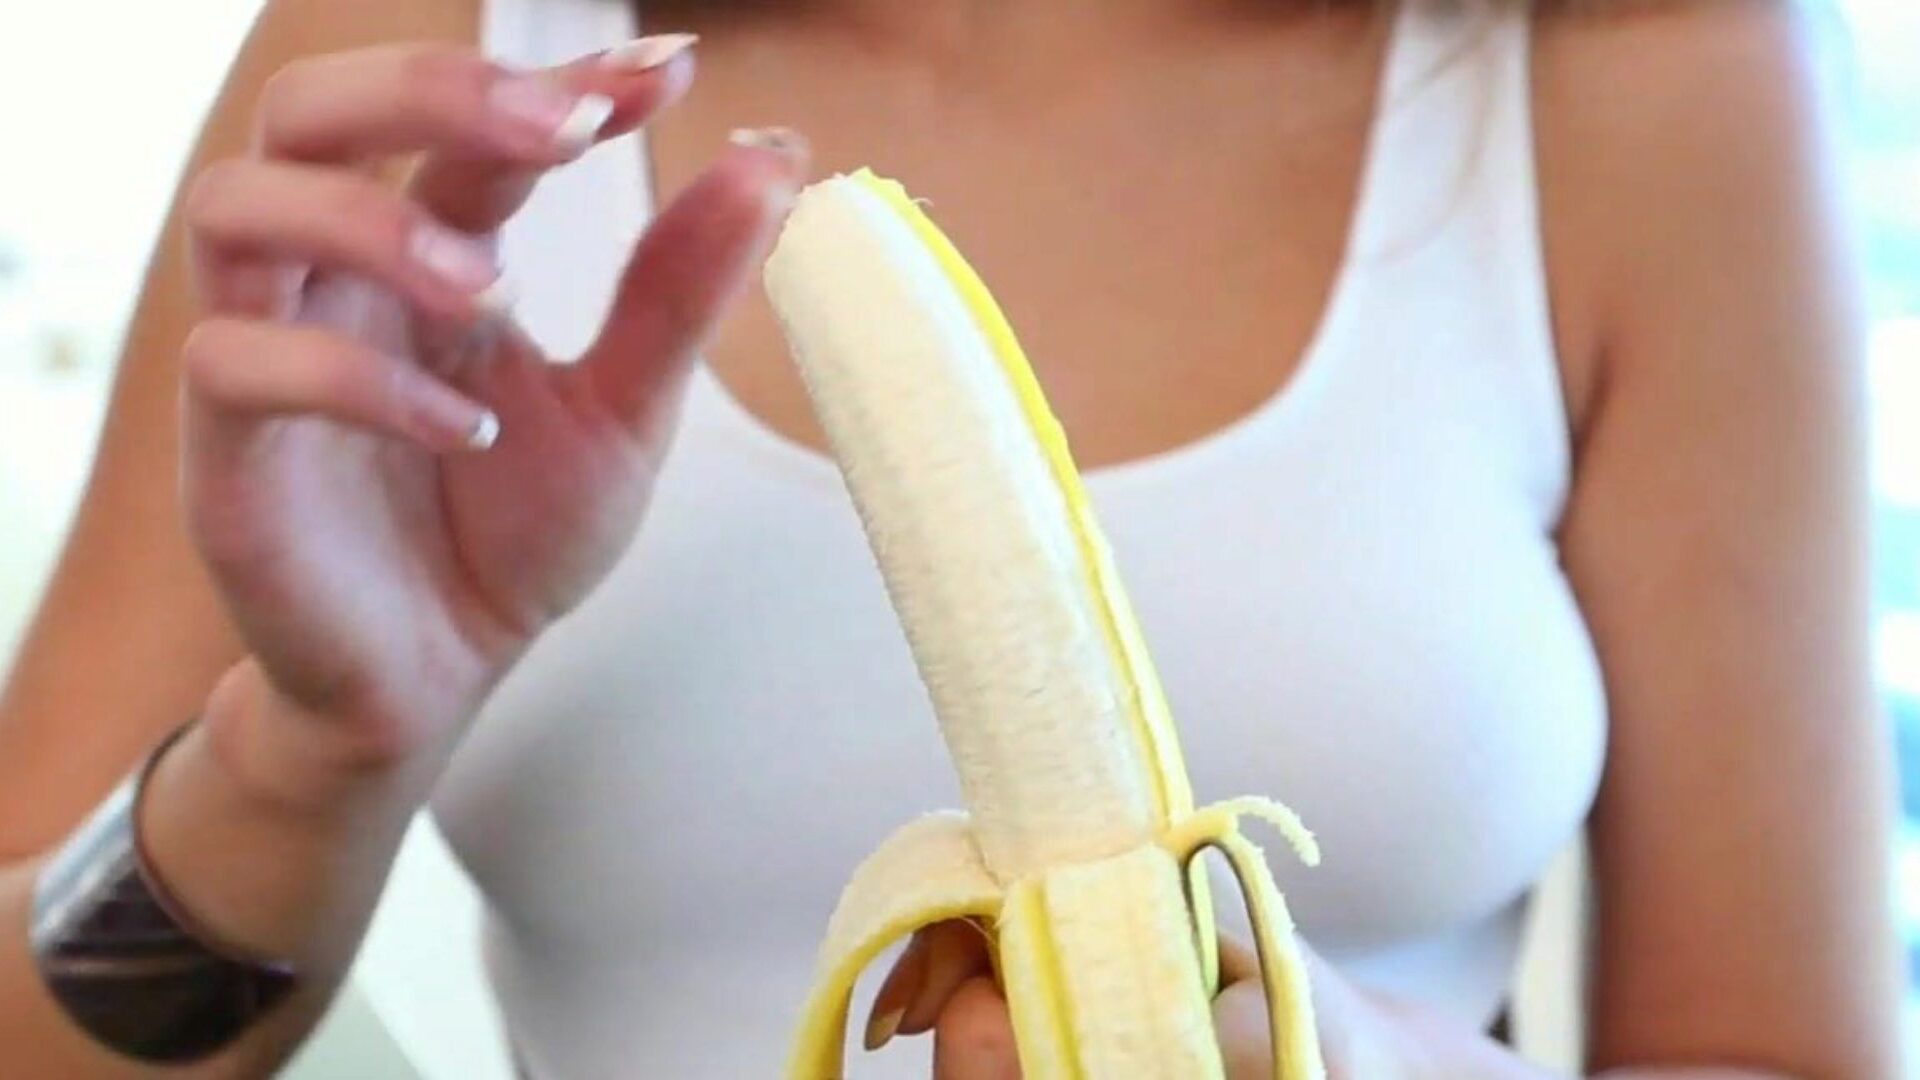 Nude With Banana picture photo